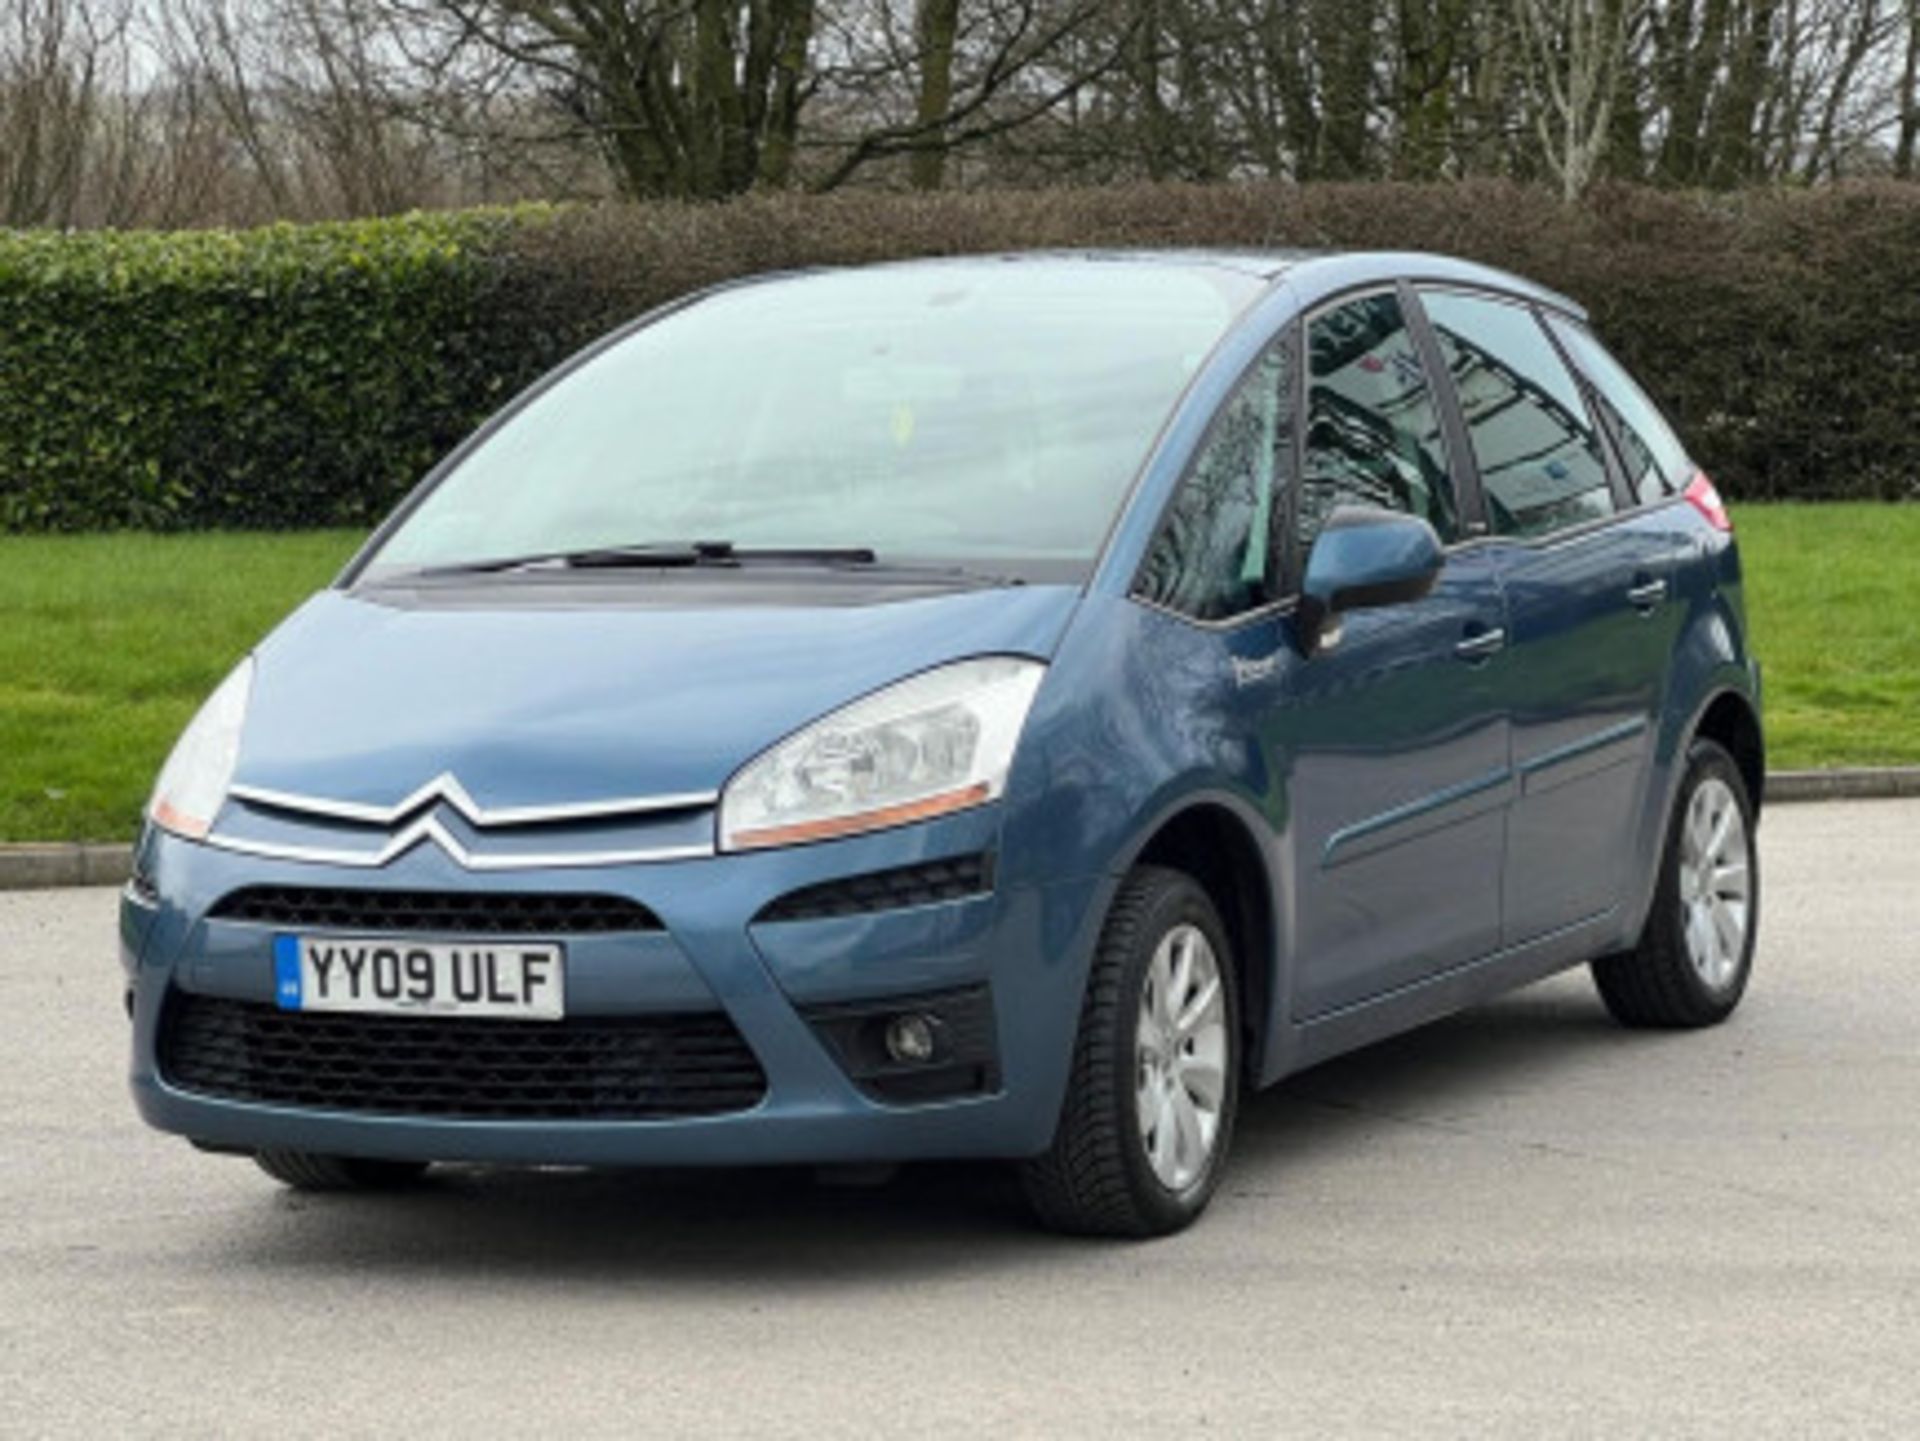 2009 CITROEN C4 PICASSO 1.6 HDI VTR+ EGS6 5DR >>--NO VAT ON HAMMER--<< - Image 47 of 123